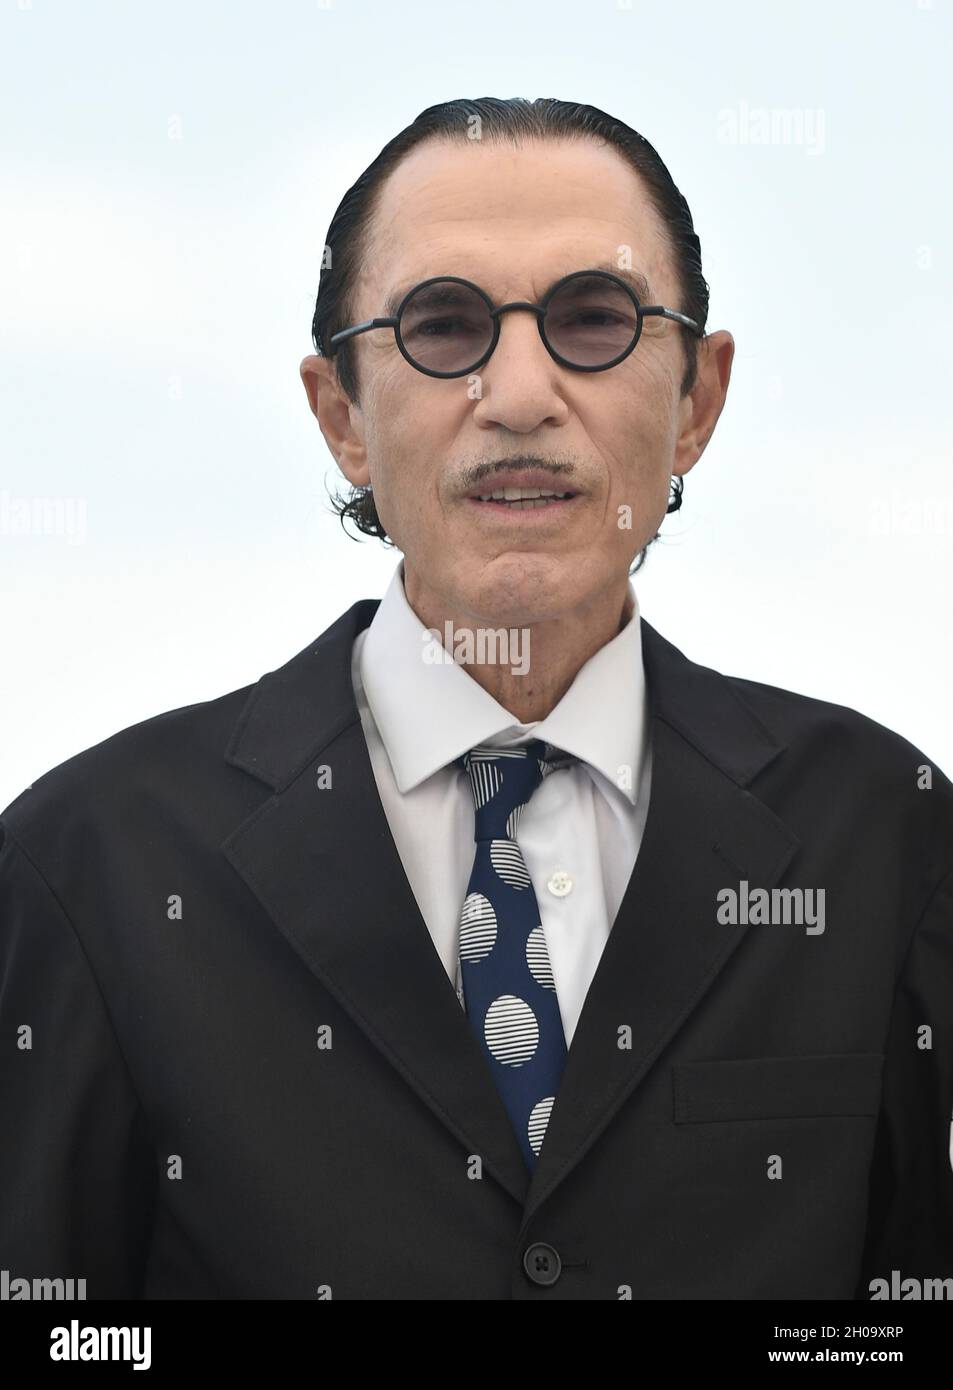 74th edition of the Cannes Film Festival: musician, songwriter and composer Ron Mael posing during the photocall for the film 'Annette” by Leos Carax, Stock Photo